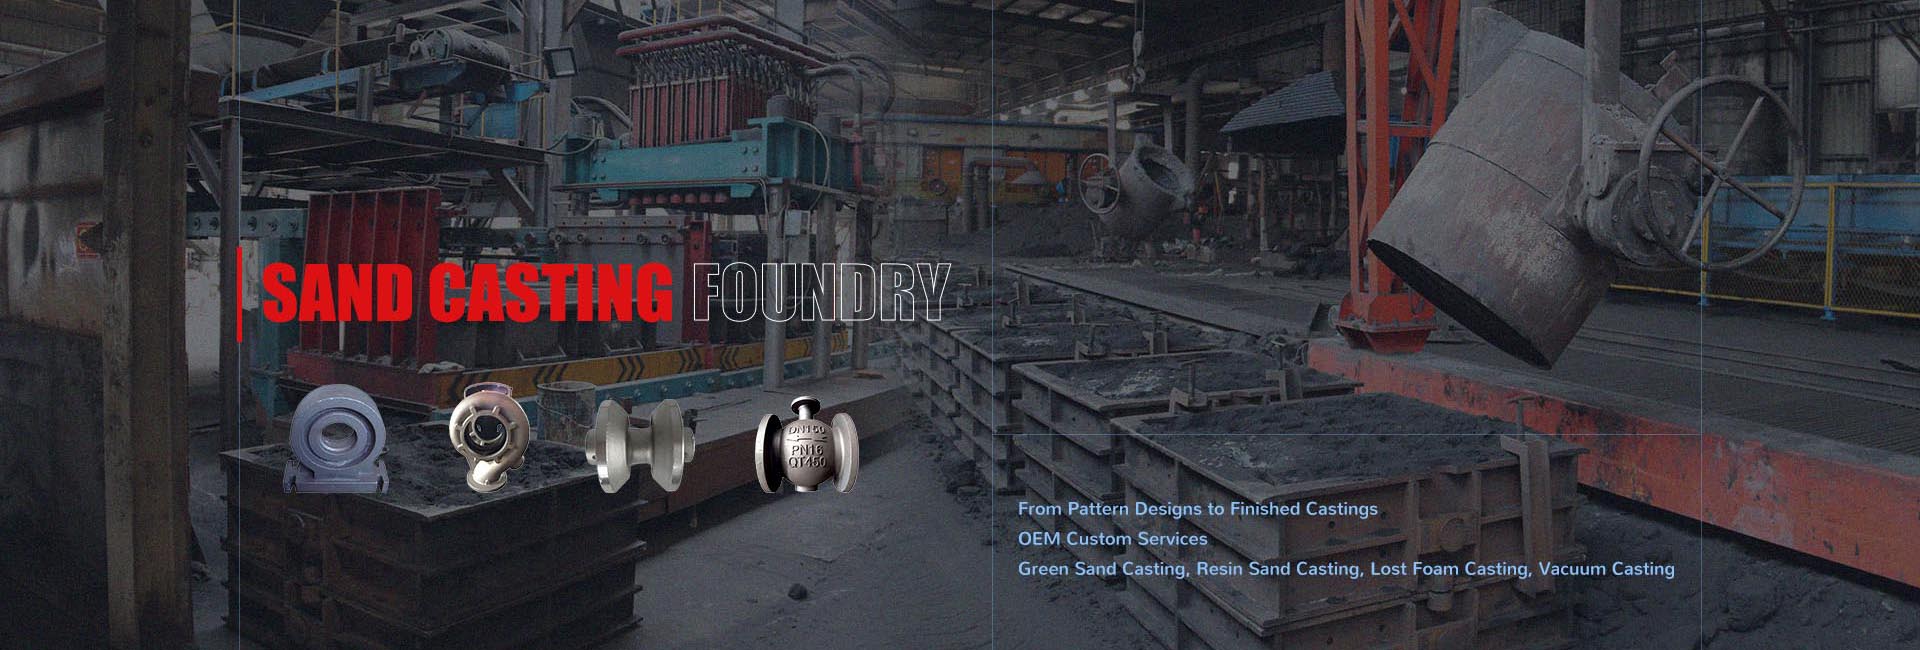 Gray and Ductile Iron Sand Casting Foundry